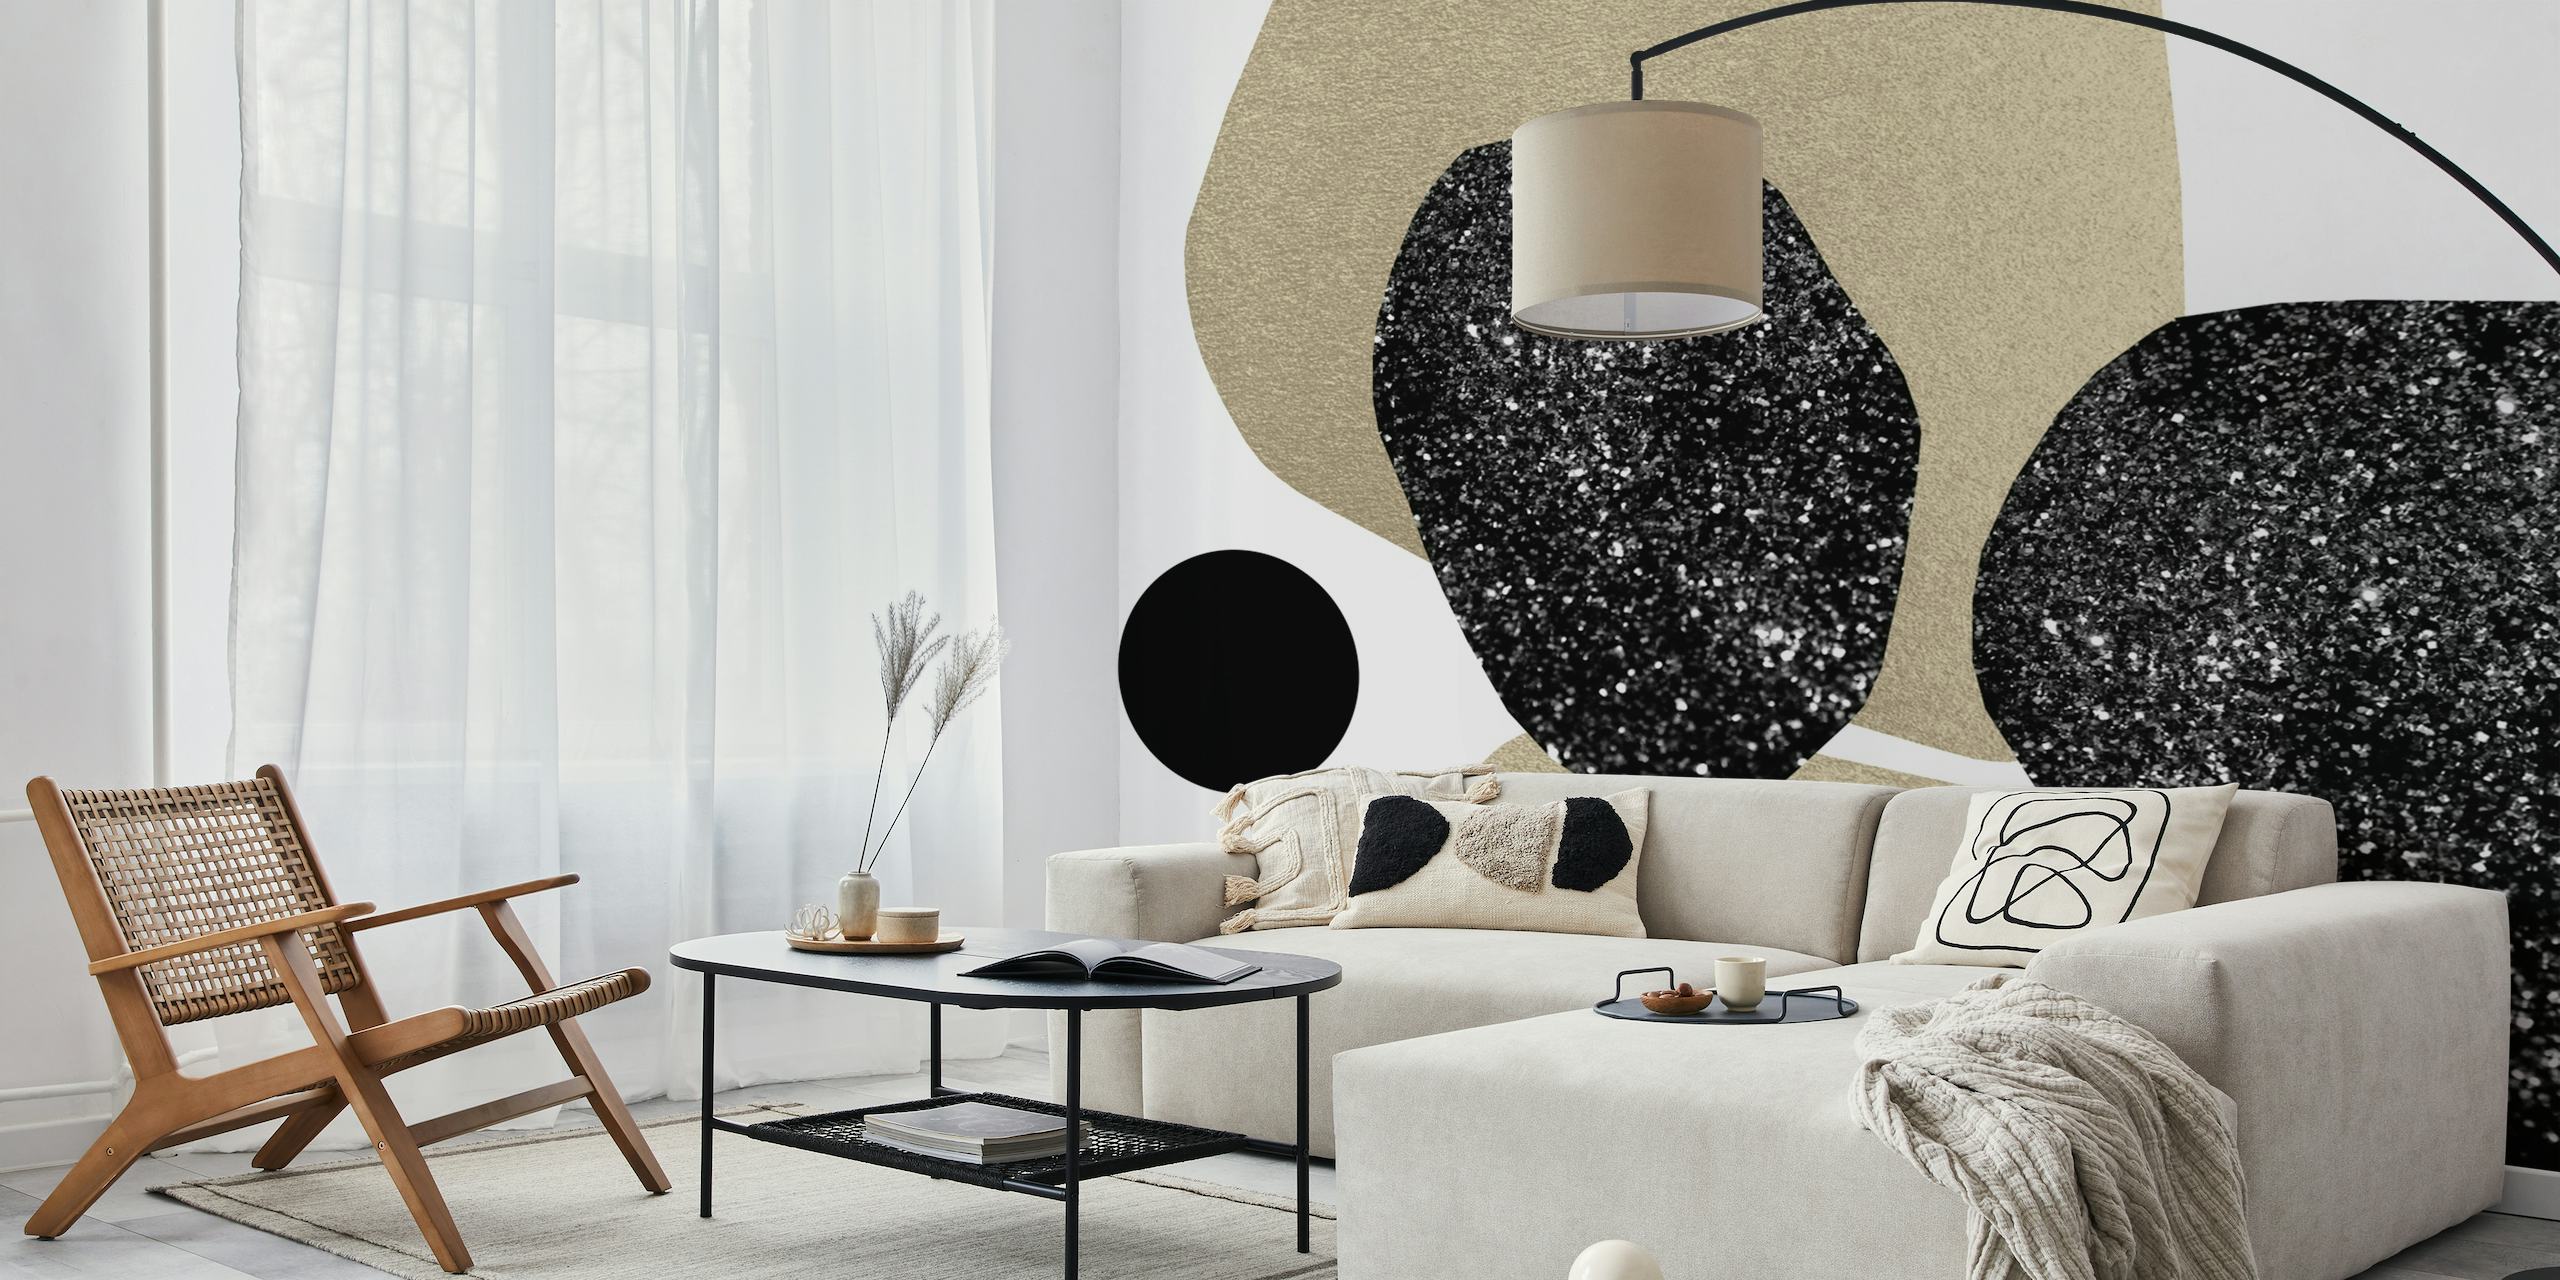 Abstract Elements 1 wall mural with organic shapes in beige and black